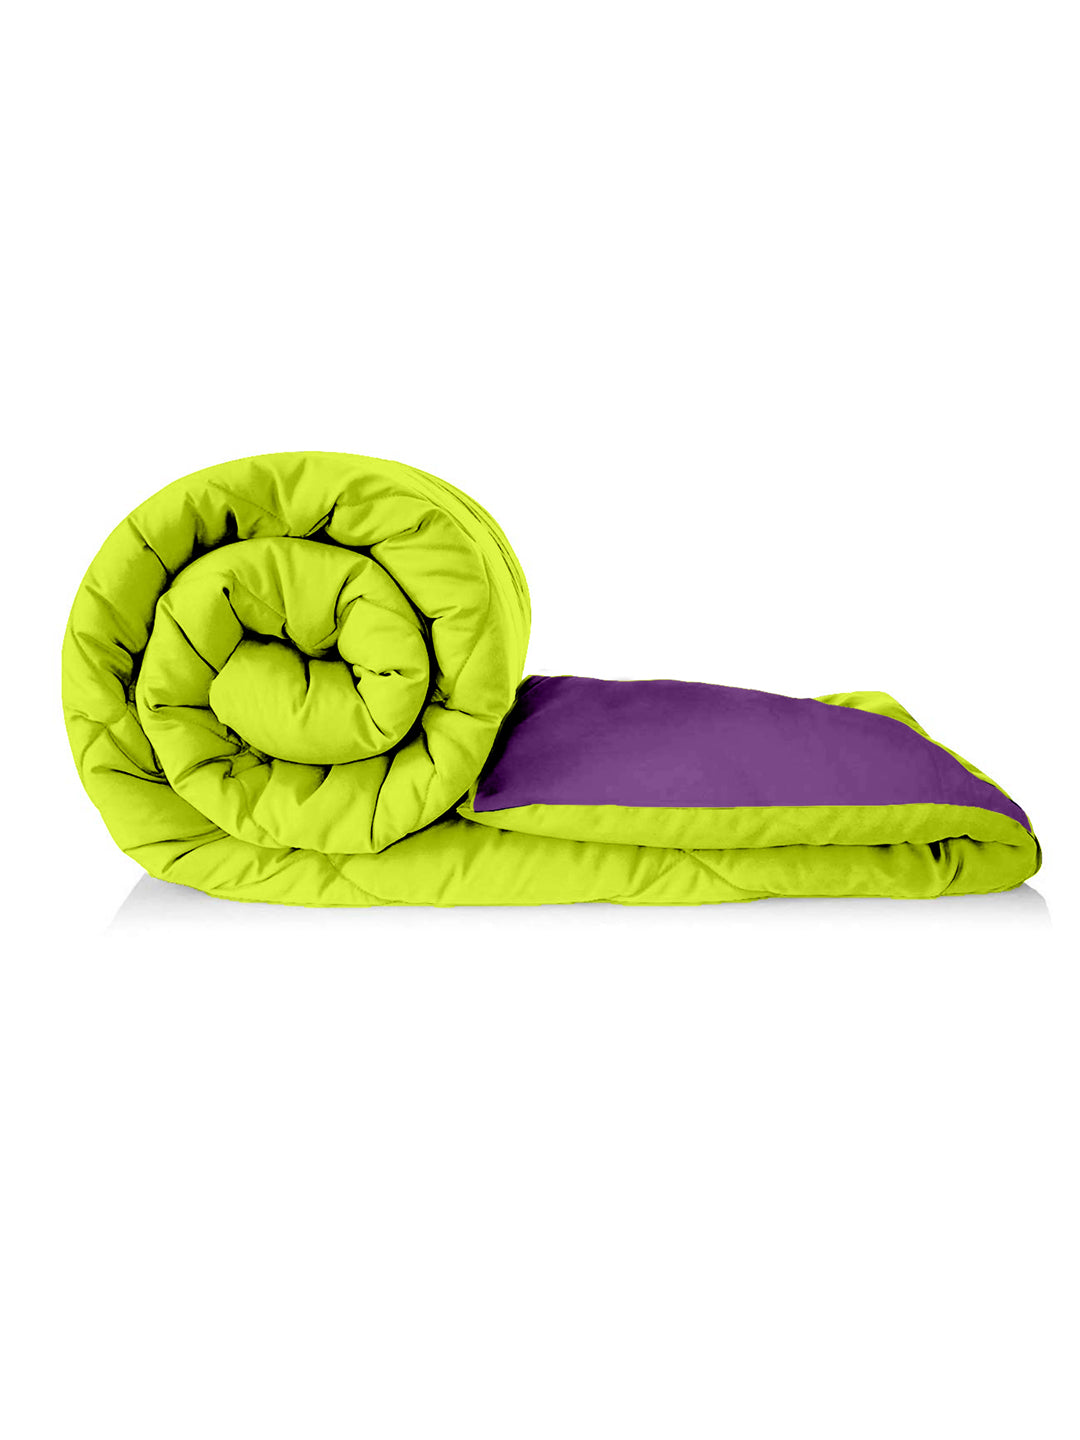 Reversible Single Bed Comforter 200 GSM 60x90 Inches (Purple & Green)